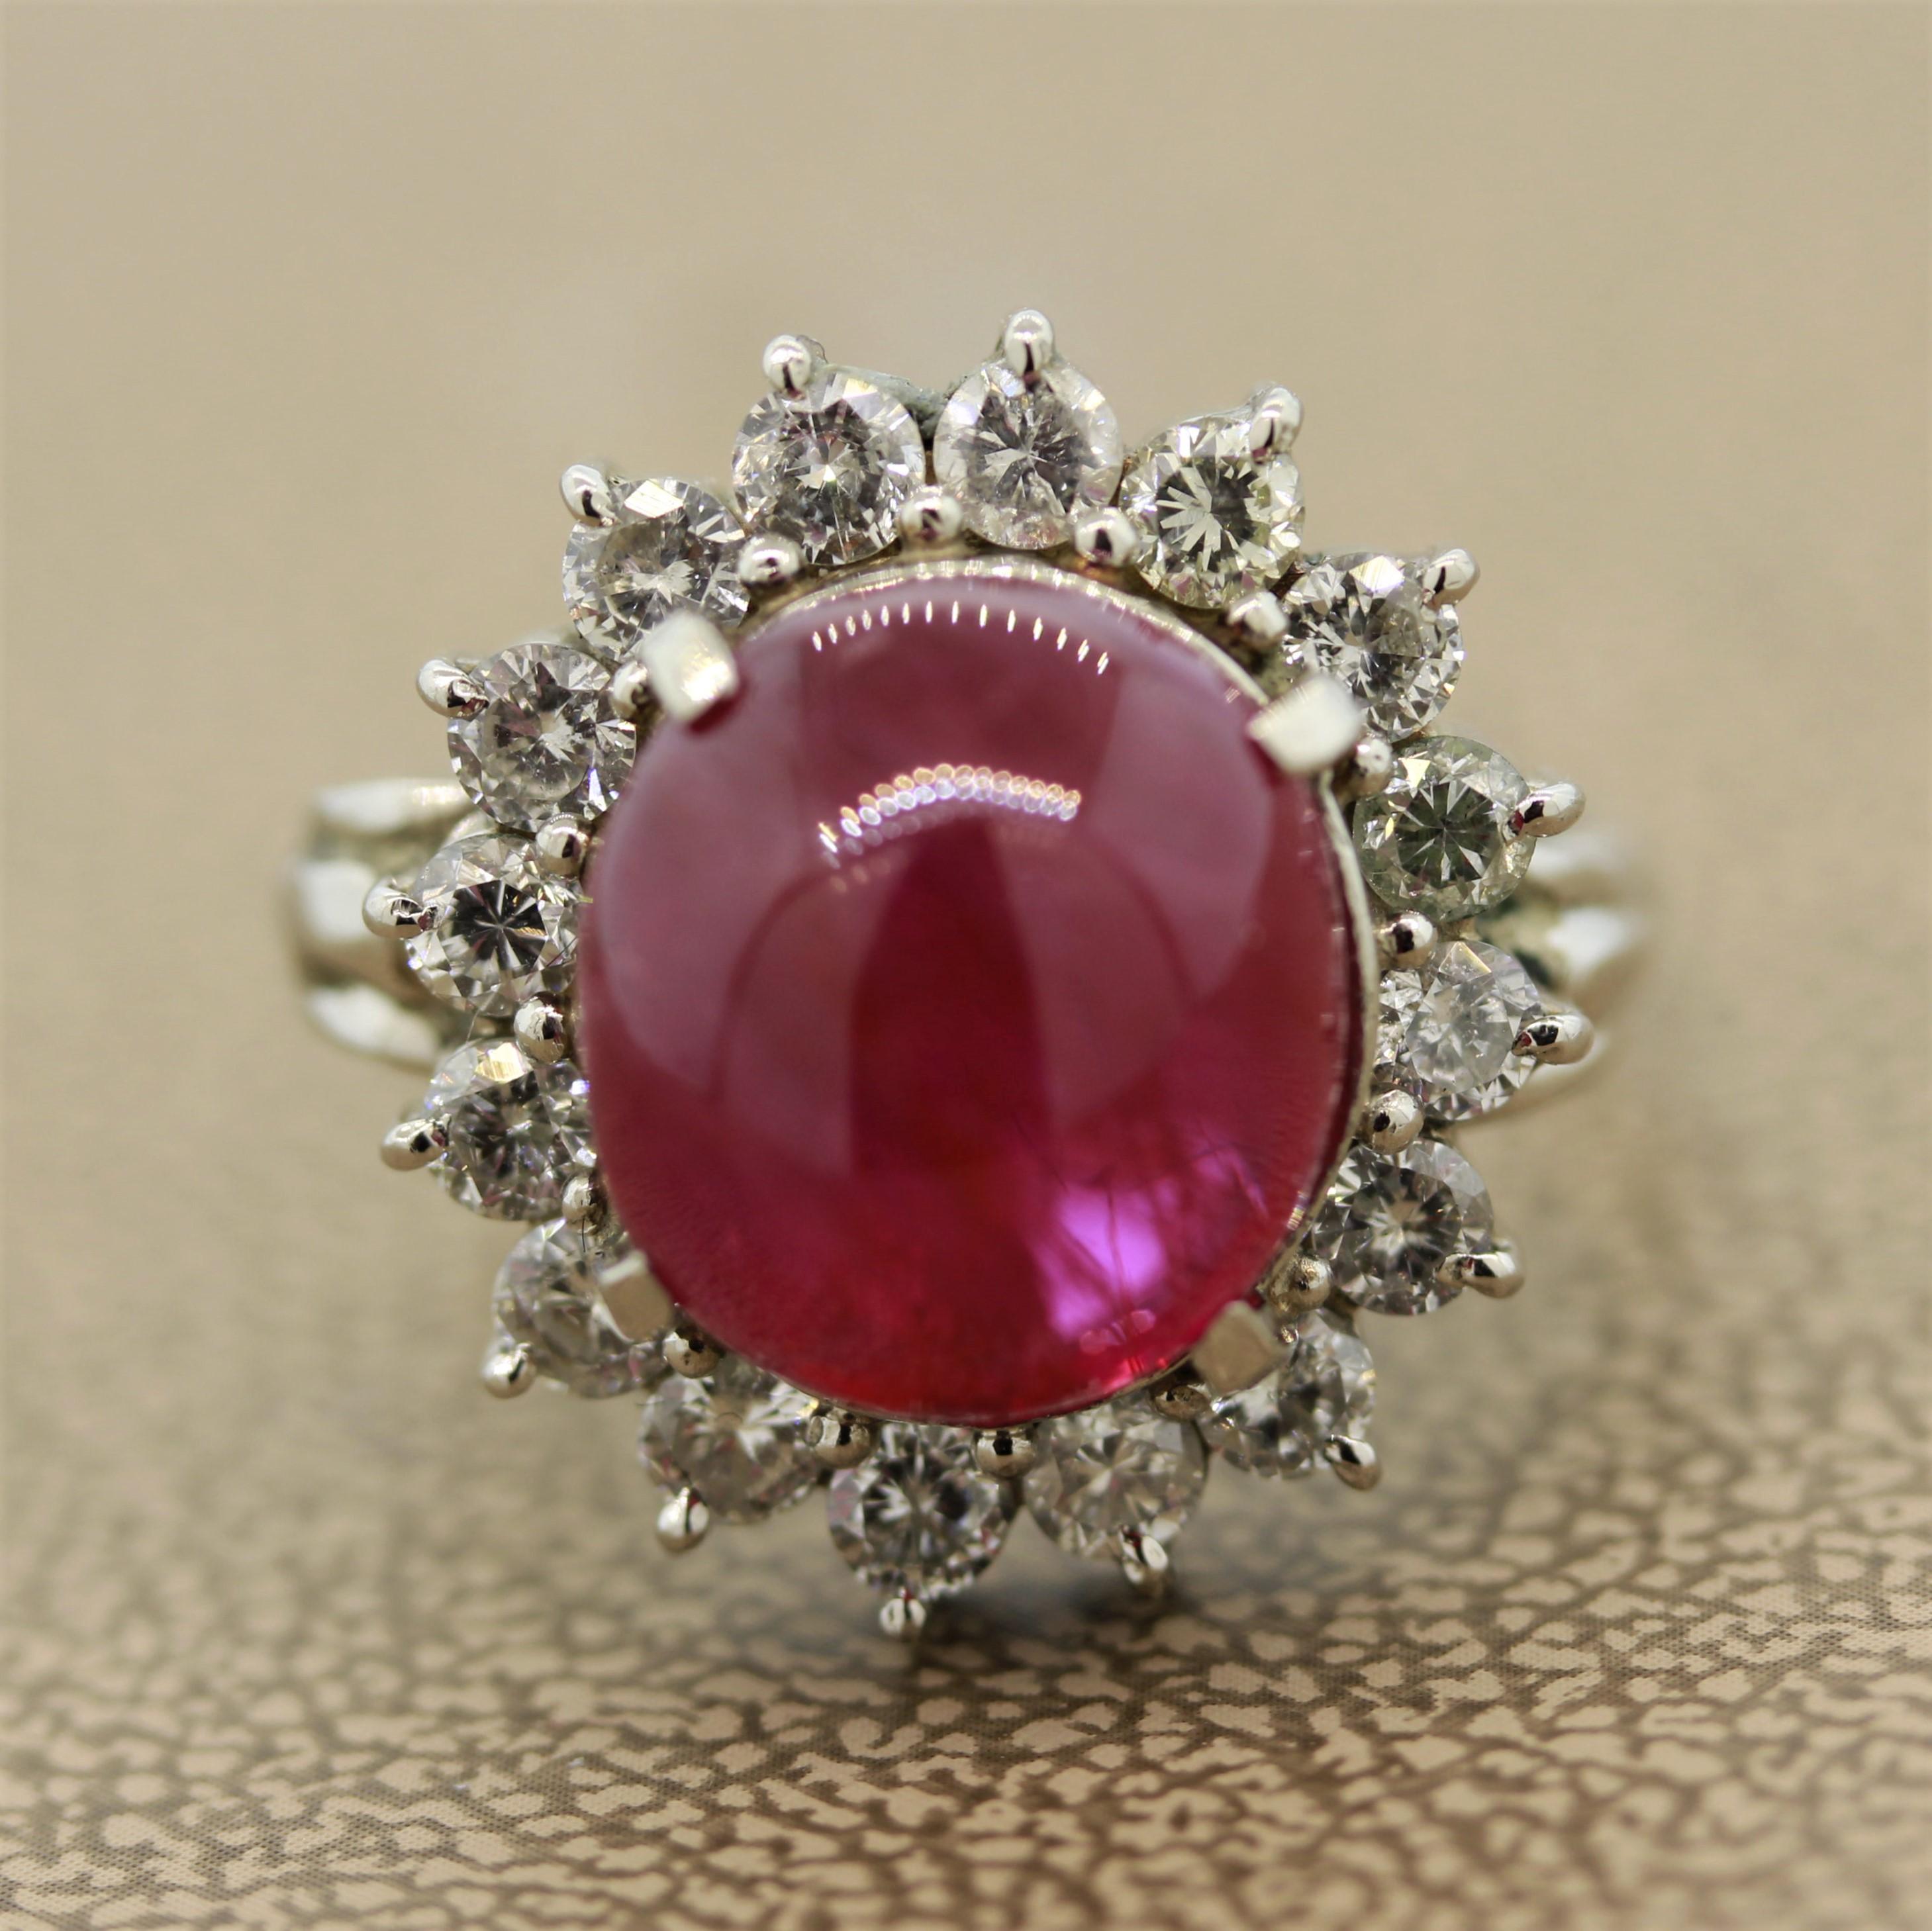 A stunning piece featuring a large 10.30 carat cabochon ruby which as been certified by the GIA. Rubies of this size are rare, especially ones that are free of any treatment such as this fine piece. It has a deep vivid red color and glows under the